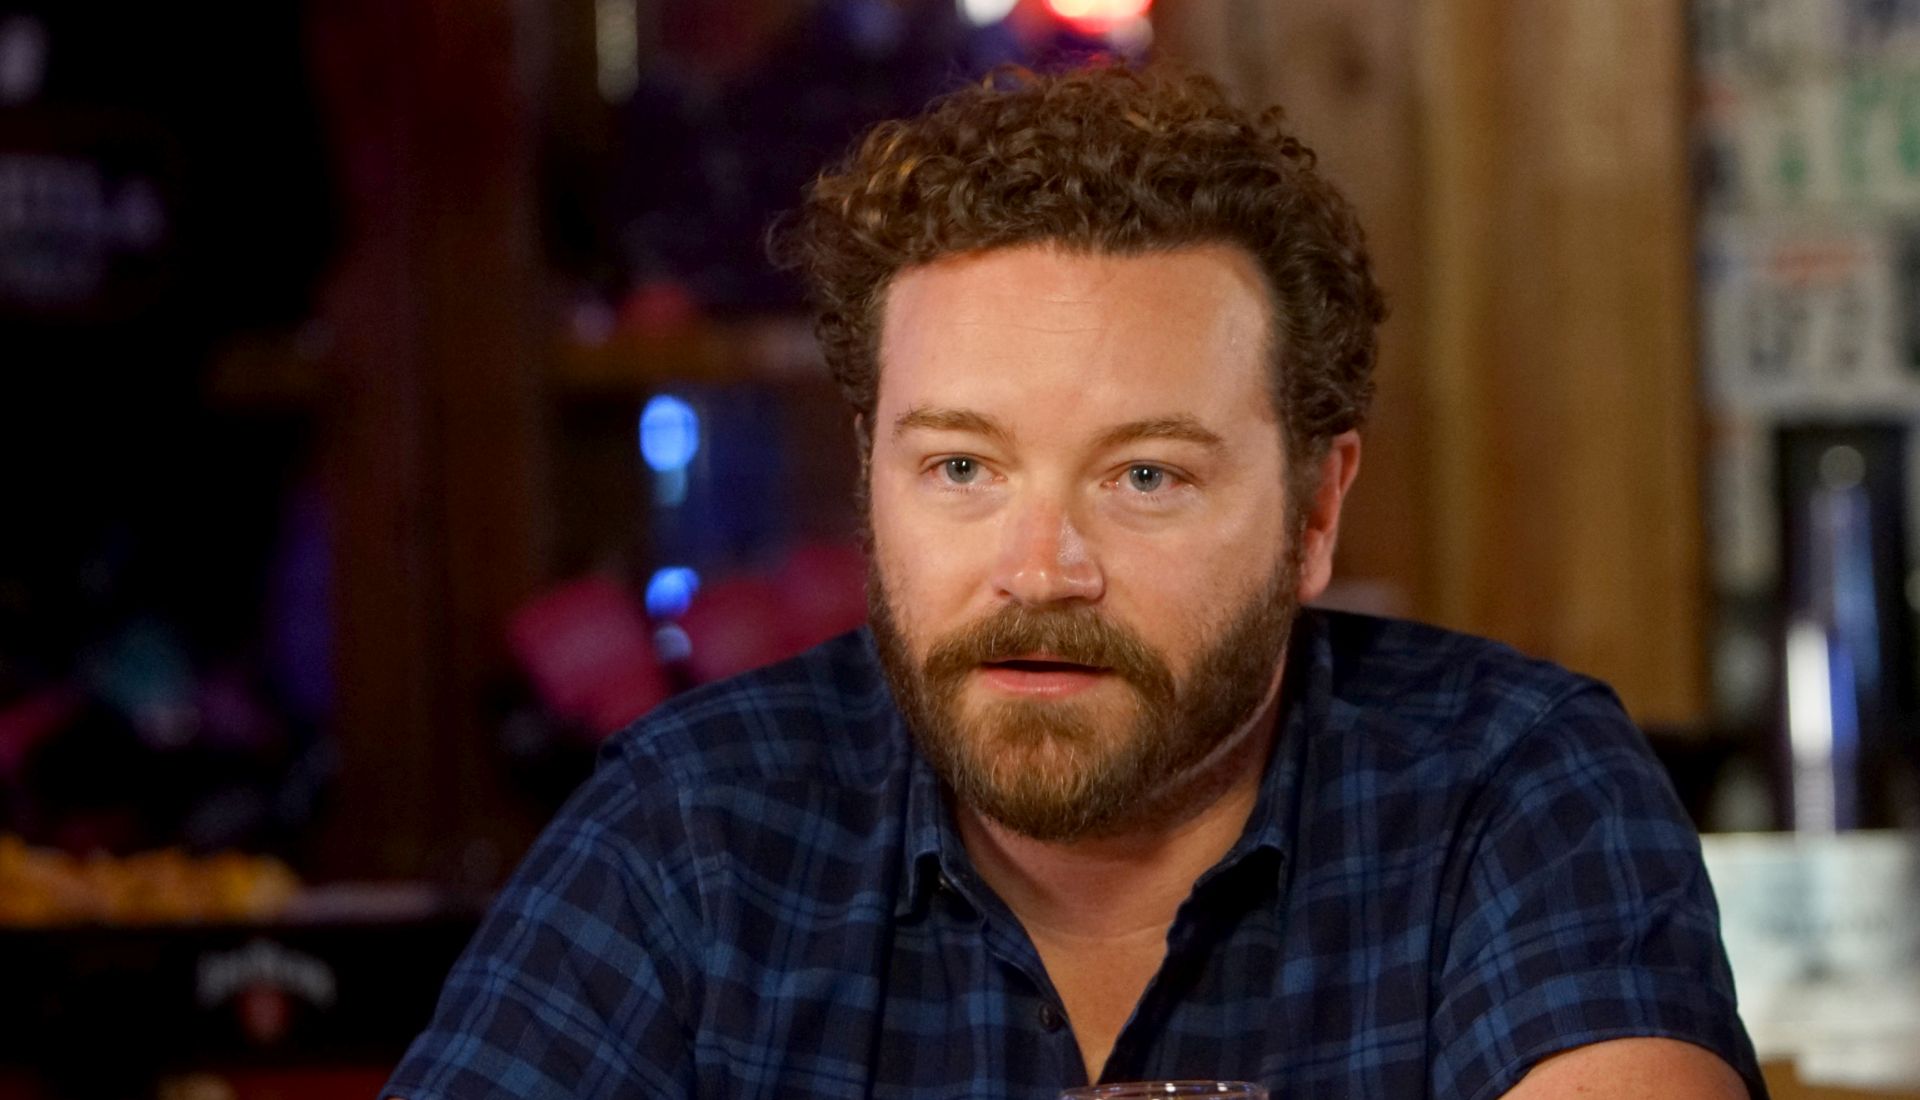 NASHVILLE, TN - JUNE 07:  Danny Masterson speaks during a Launch Event for Netflix "The Ranch: Part 3" hosted by Ashton Kutcher and Danny Masterson  at Tequila Cowboy on June 7, 2017 in Nashville, Tennessee.  (Photo by Anna Webber/Getty Images for Netflix)